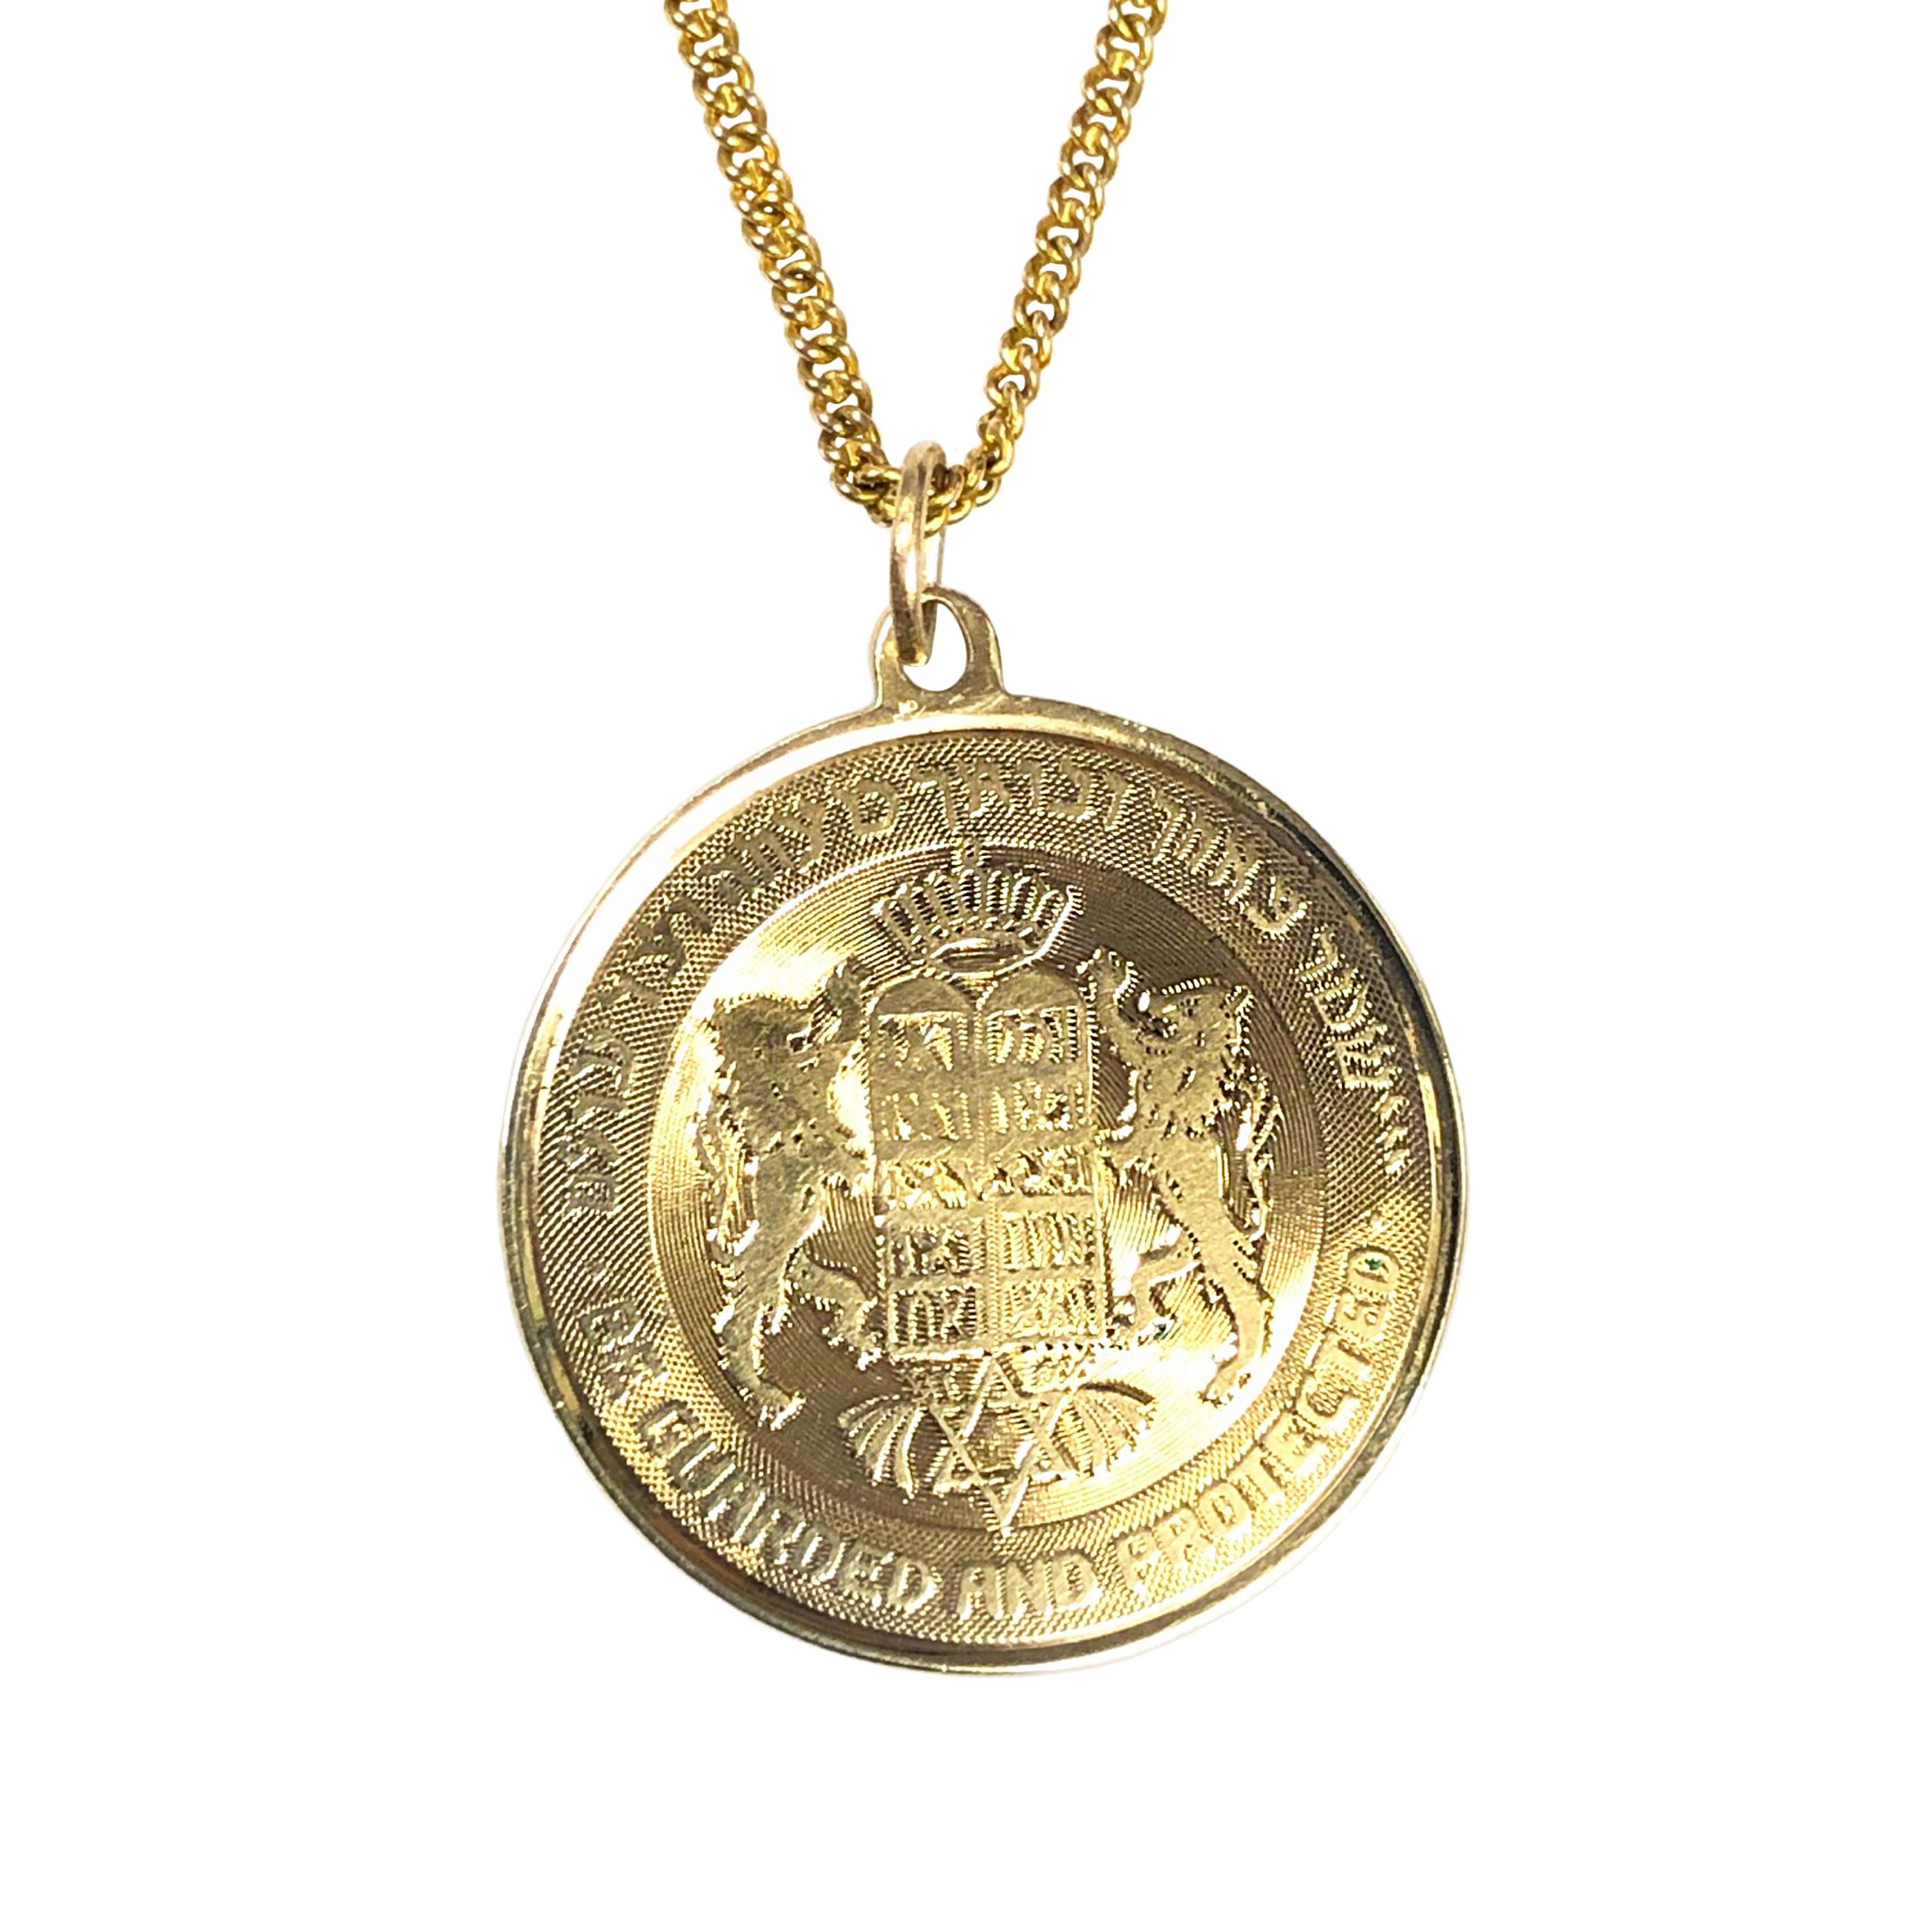 Circa 1970s 14K Yellow Gold ten Commandments disc pendant, necklace, owned and worn by Hollywood Icon Jerry Lewis and a gift from his friend also a Hollywood Icon Sammy Davis Jr. The pendant measures 1 inch in diameter and suspended from a 20 inch